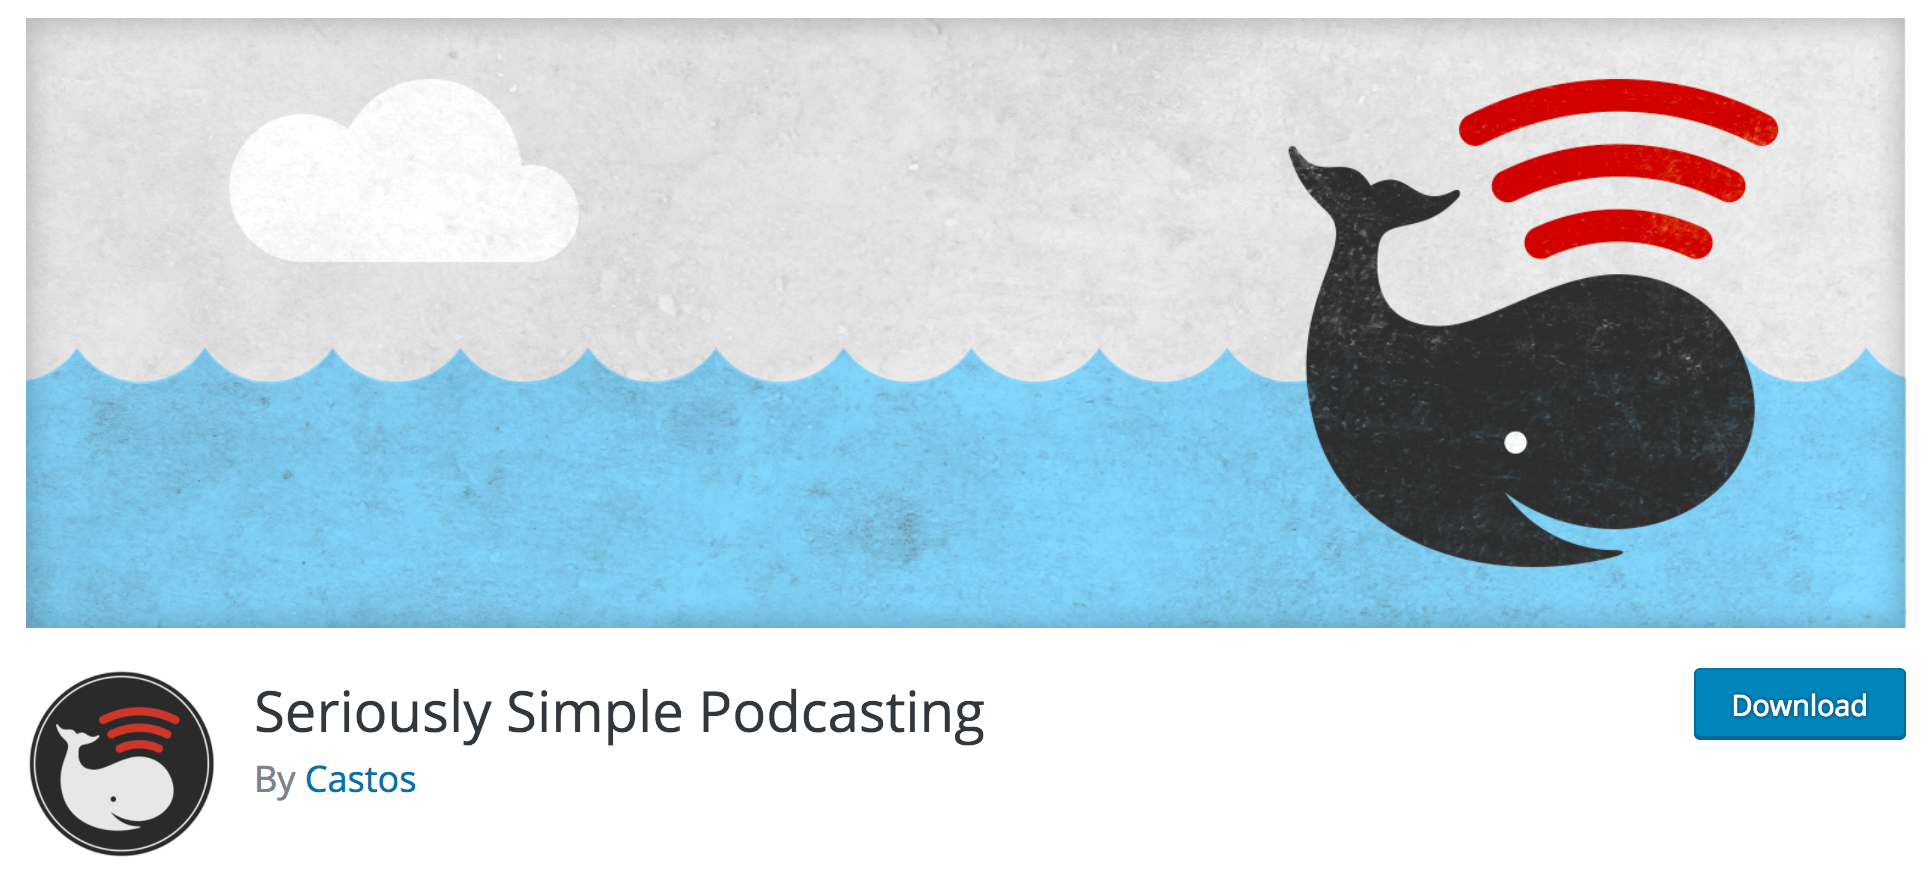 The Seriously Simple Podcasting plugin.